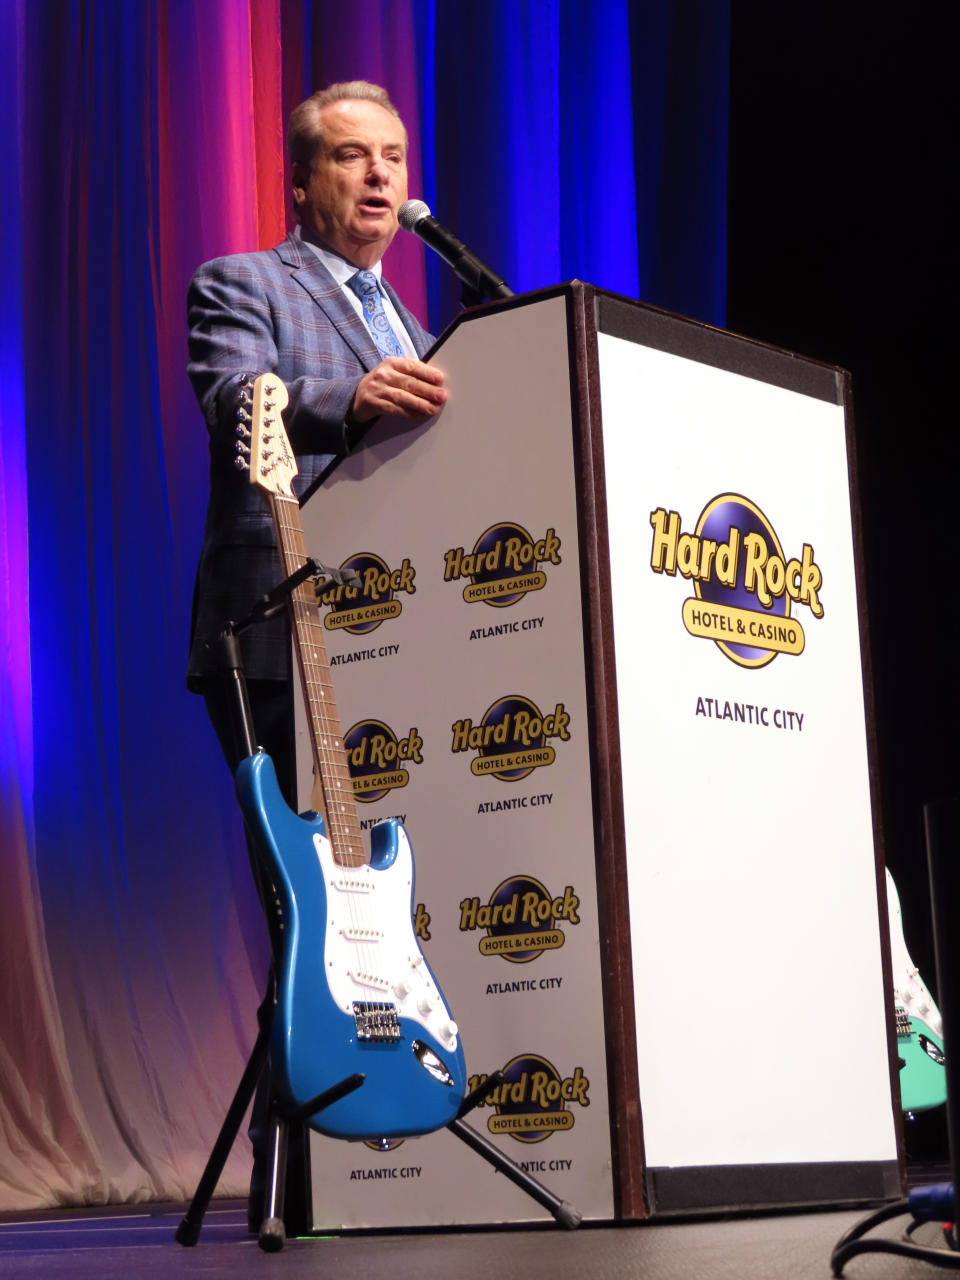 Jim Allen, chairman of Hard Rock International, speaks at an employee meeting at the Hard Rock casino in Atlantic City, N.J., on Feb. 17, 2022. On Monday, June 6, 2022, Allen said he spoke recently with New Jersey Gov. Phil Murphy about a proposed ban on smoking in Atlantic City casinos, but says he was not out to change the governor's mind. (AP Photo/Wayne Parry)